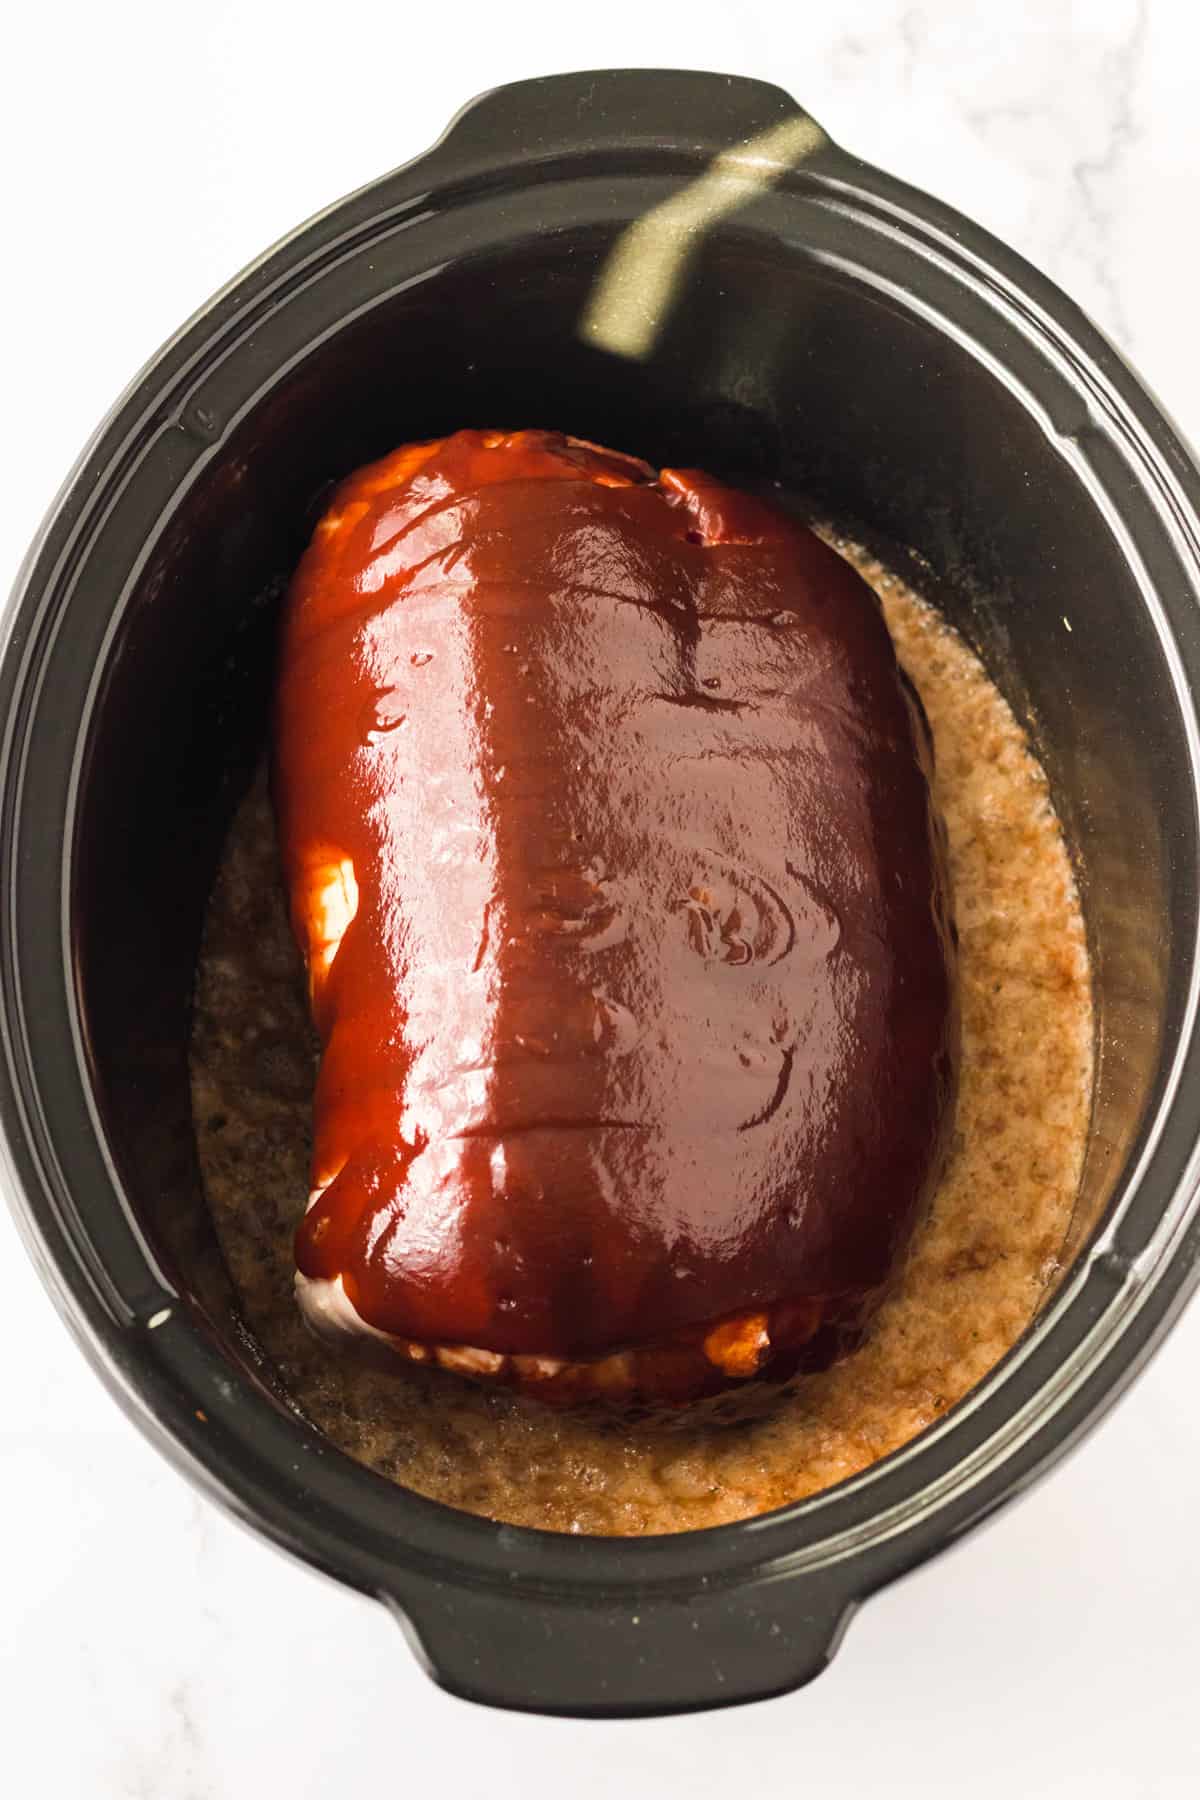 Pork shoulder butt with BBQ sauce and root beer added to slow cooker.